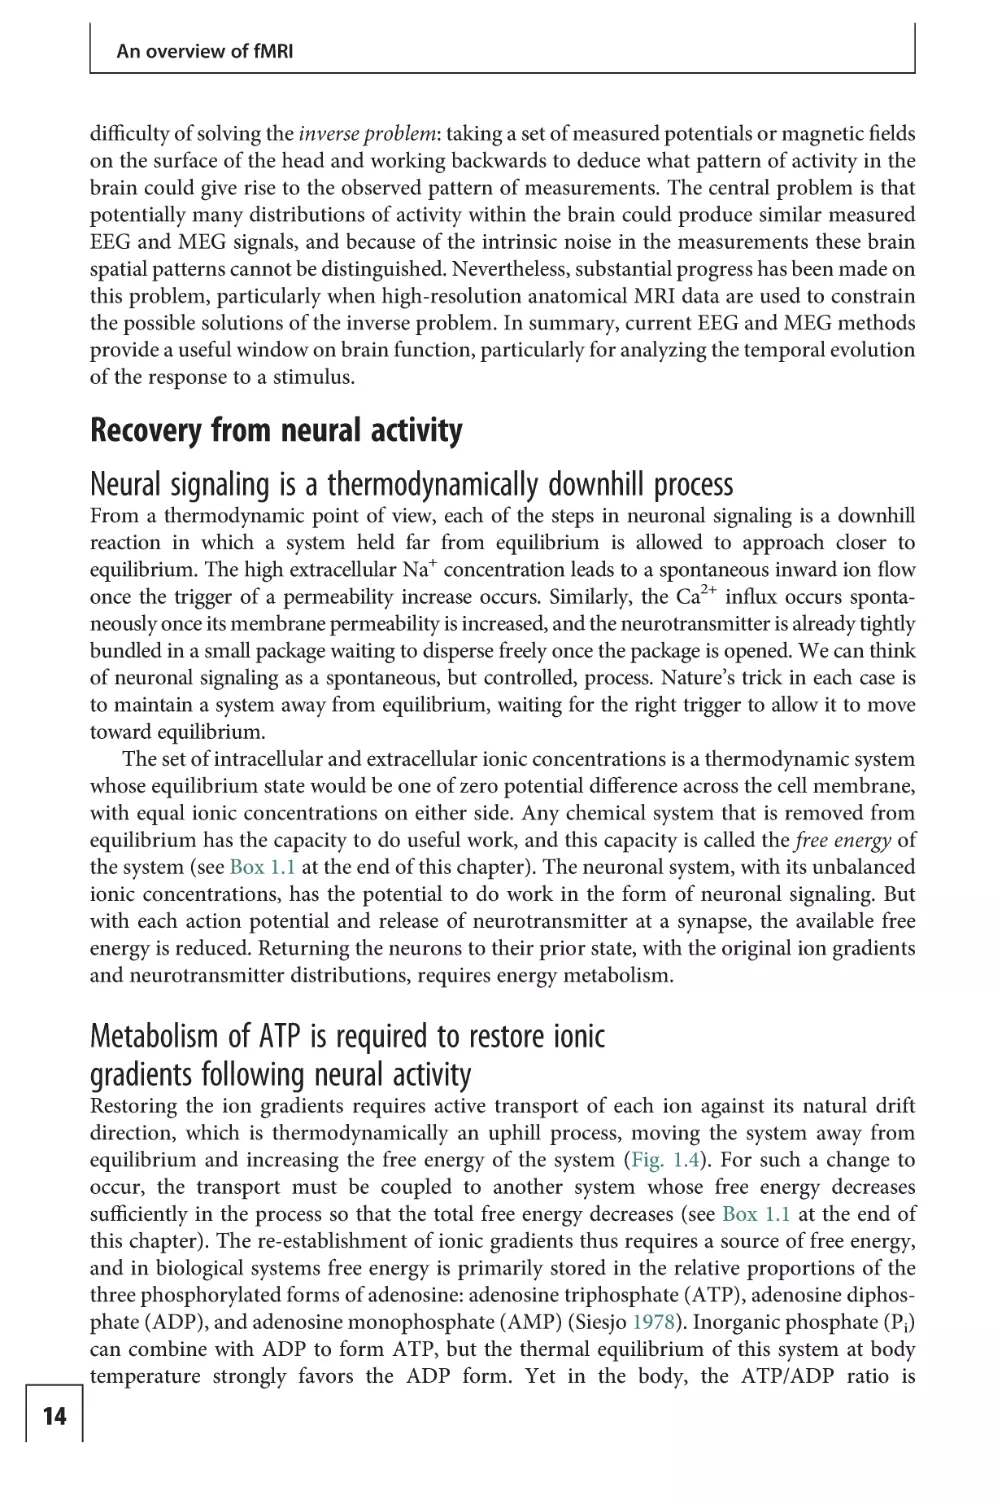 Recovery from neural activity
Neural signaling is a thermodynamically downhill process
Metabolism of ATP is required to restore ionic gradients following neural activity